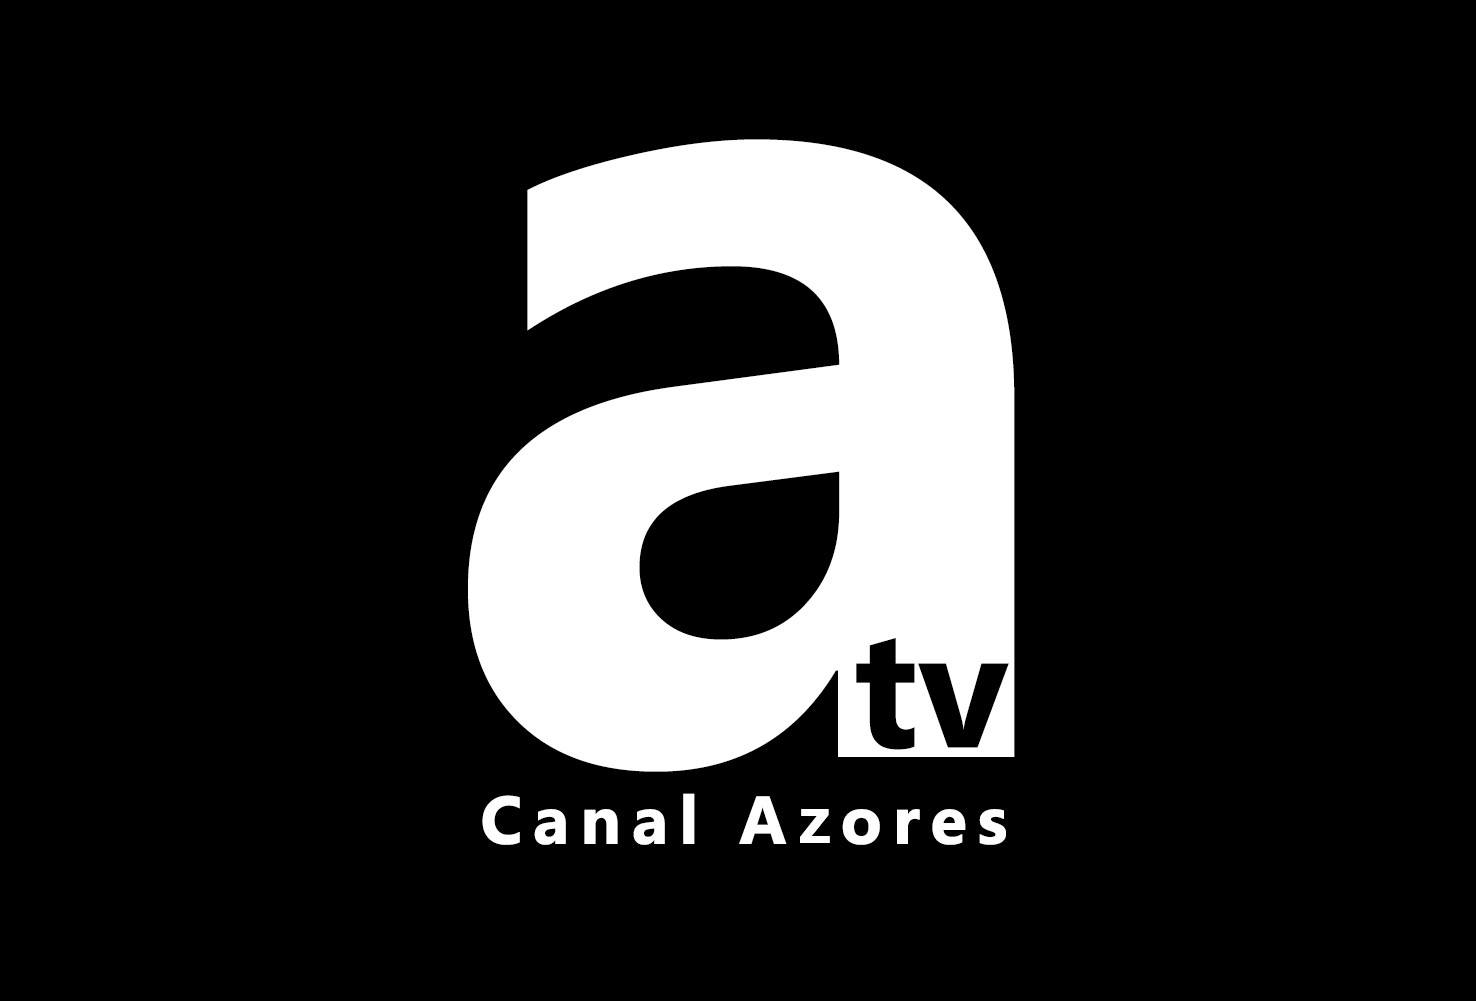 Canal Azores